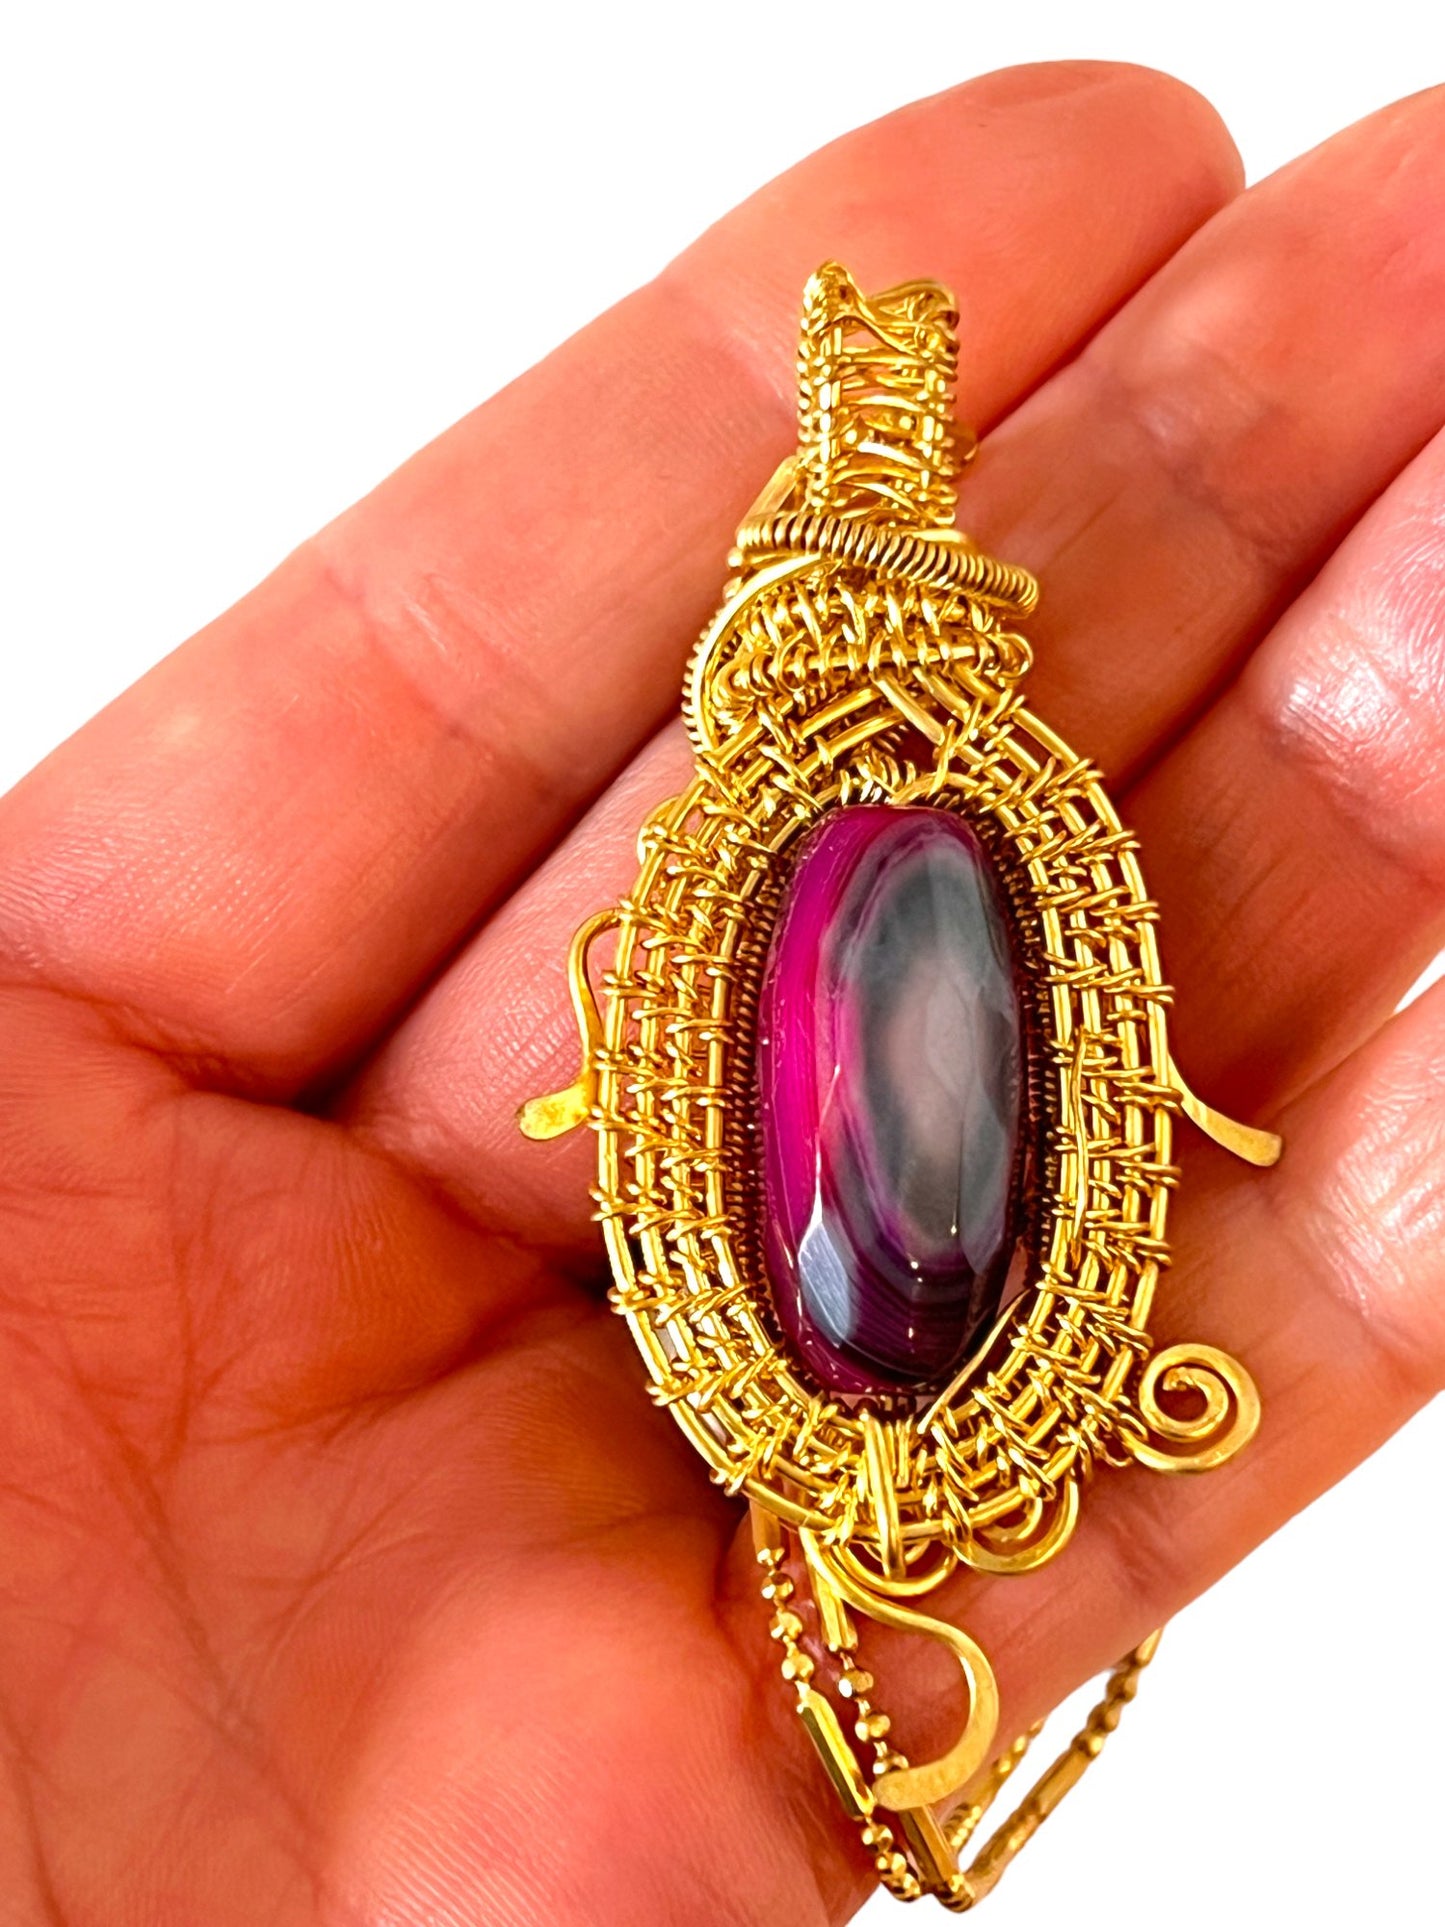 Woven oval agate pendant necklace with warm rich colors - Sundara Joon